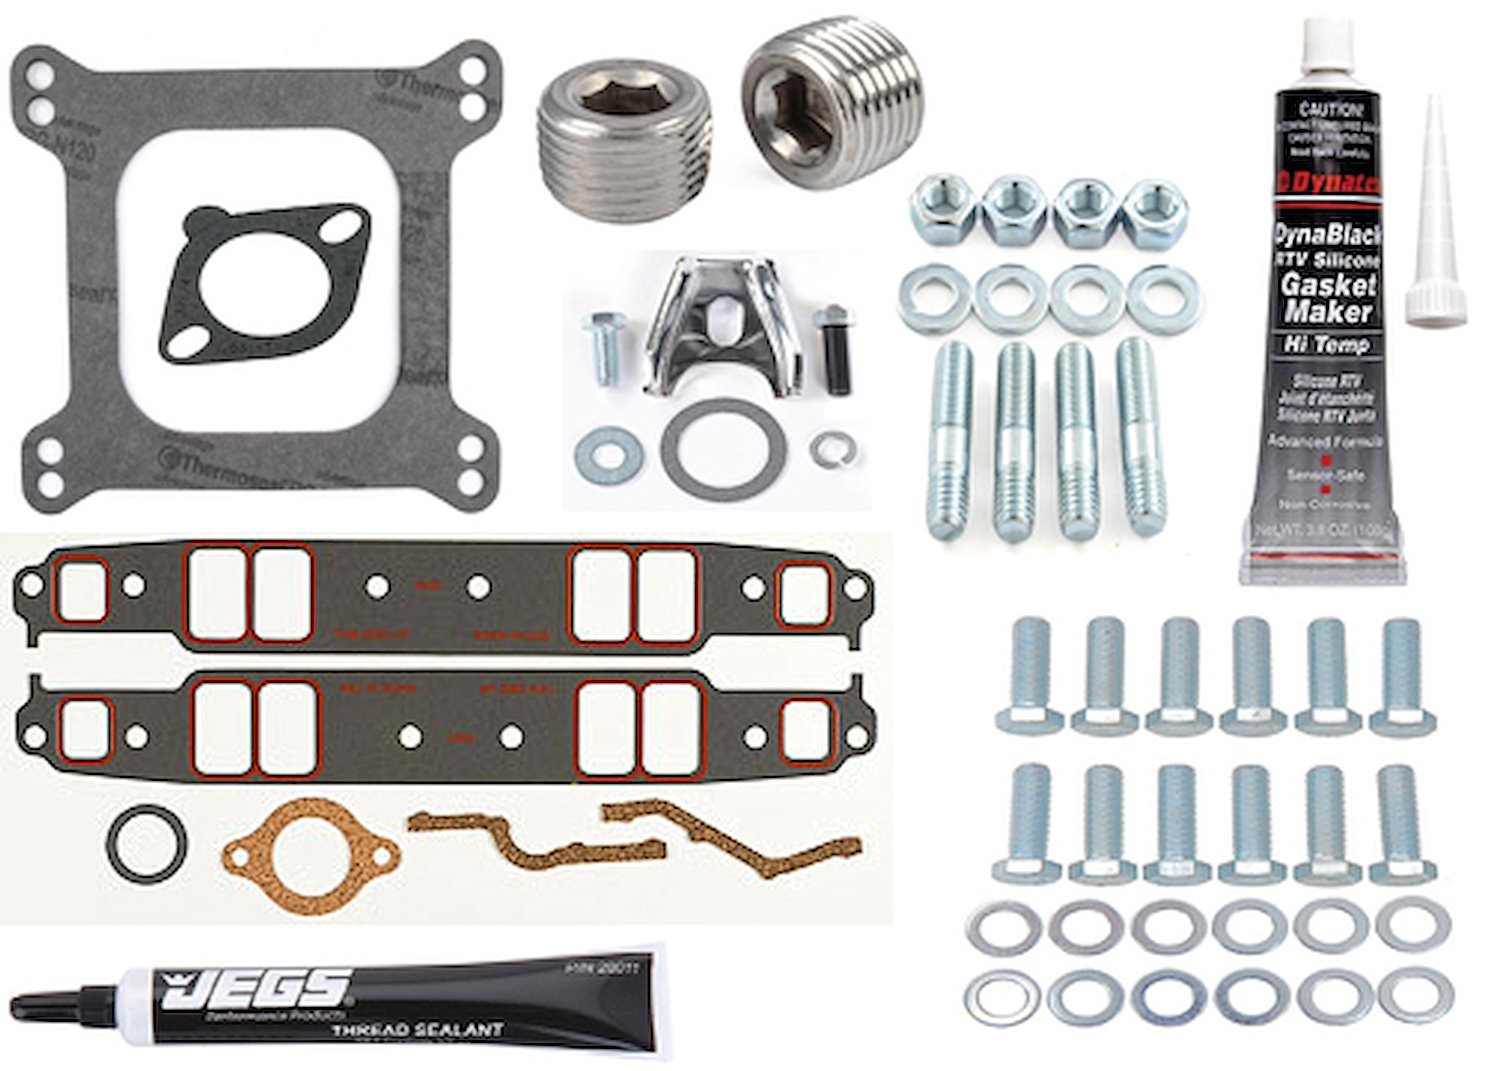 Intake Manifold Installation Kit for Small Block Chevy